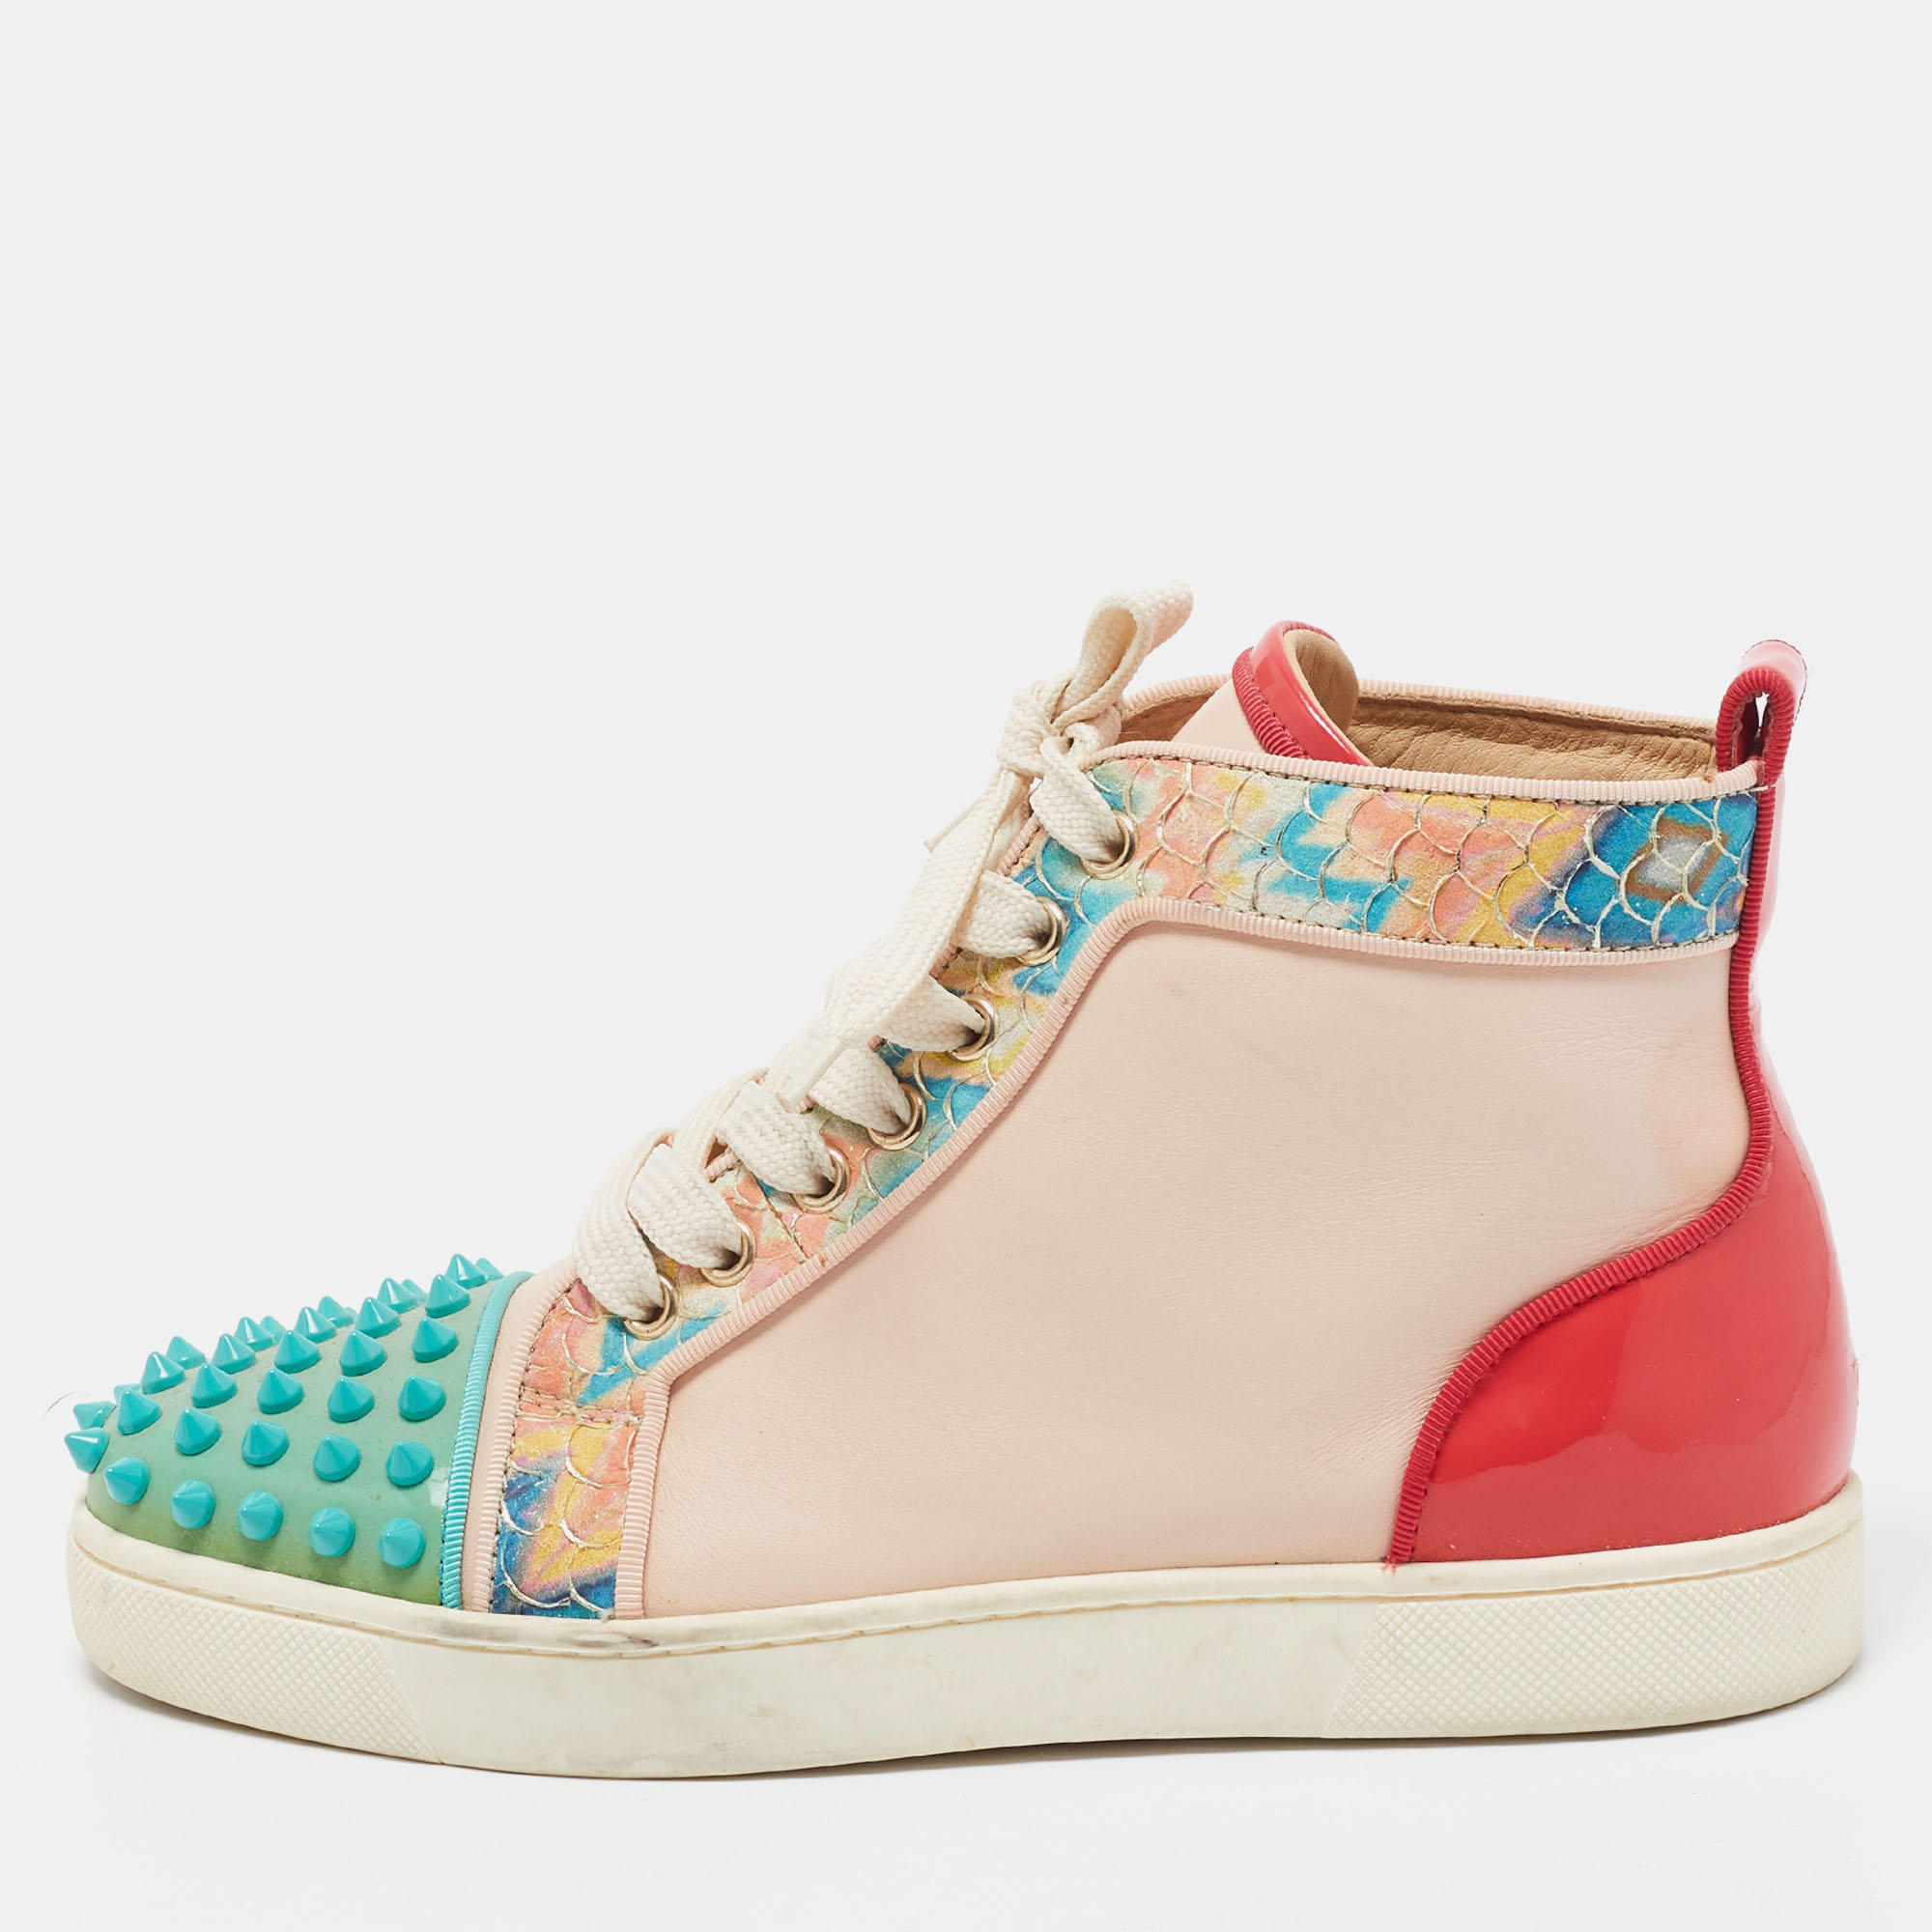 Pre-owned Christian Louboutin Multicolor Patent And Leather Louis Spikes High Top Sneakers Size 36.5